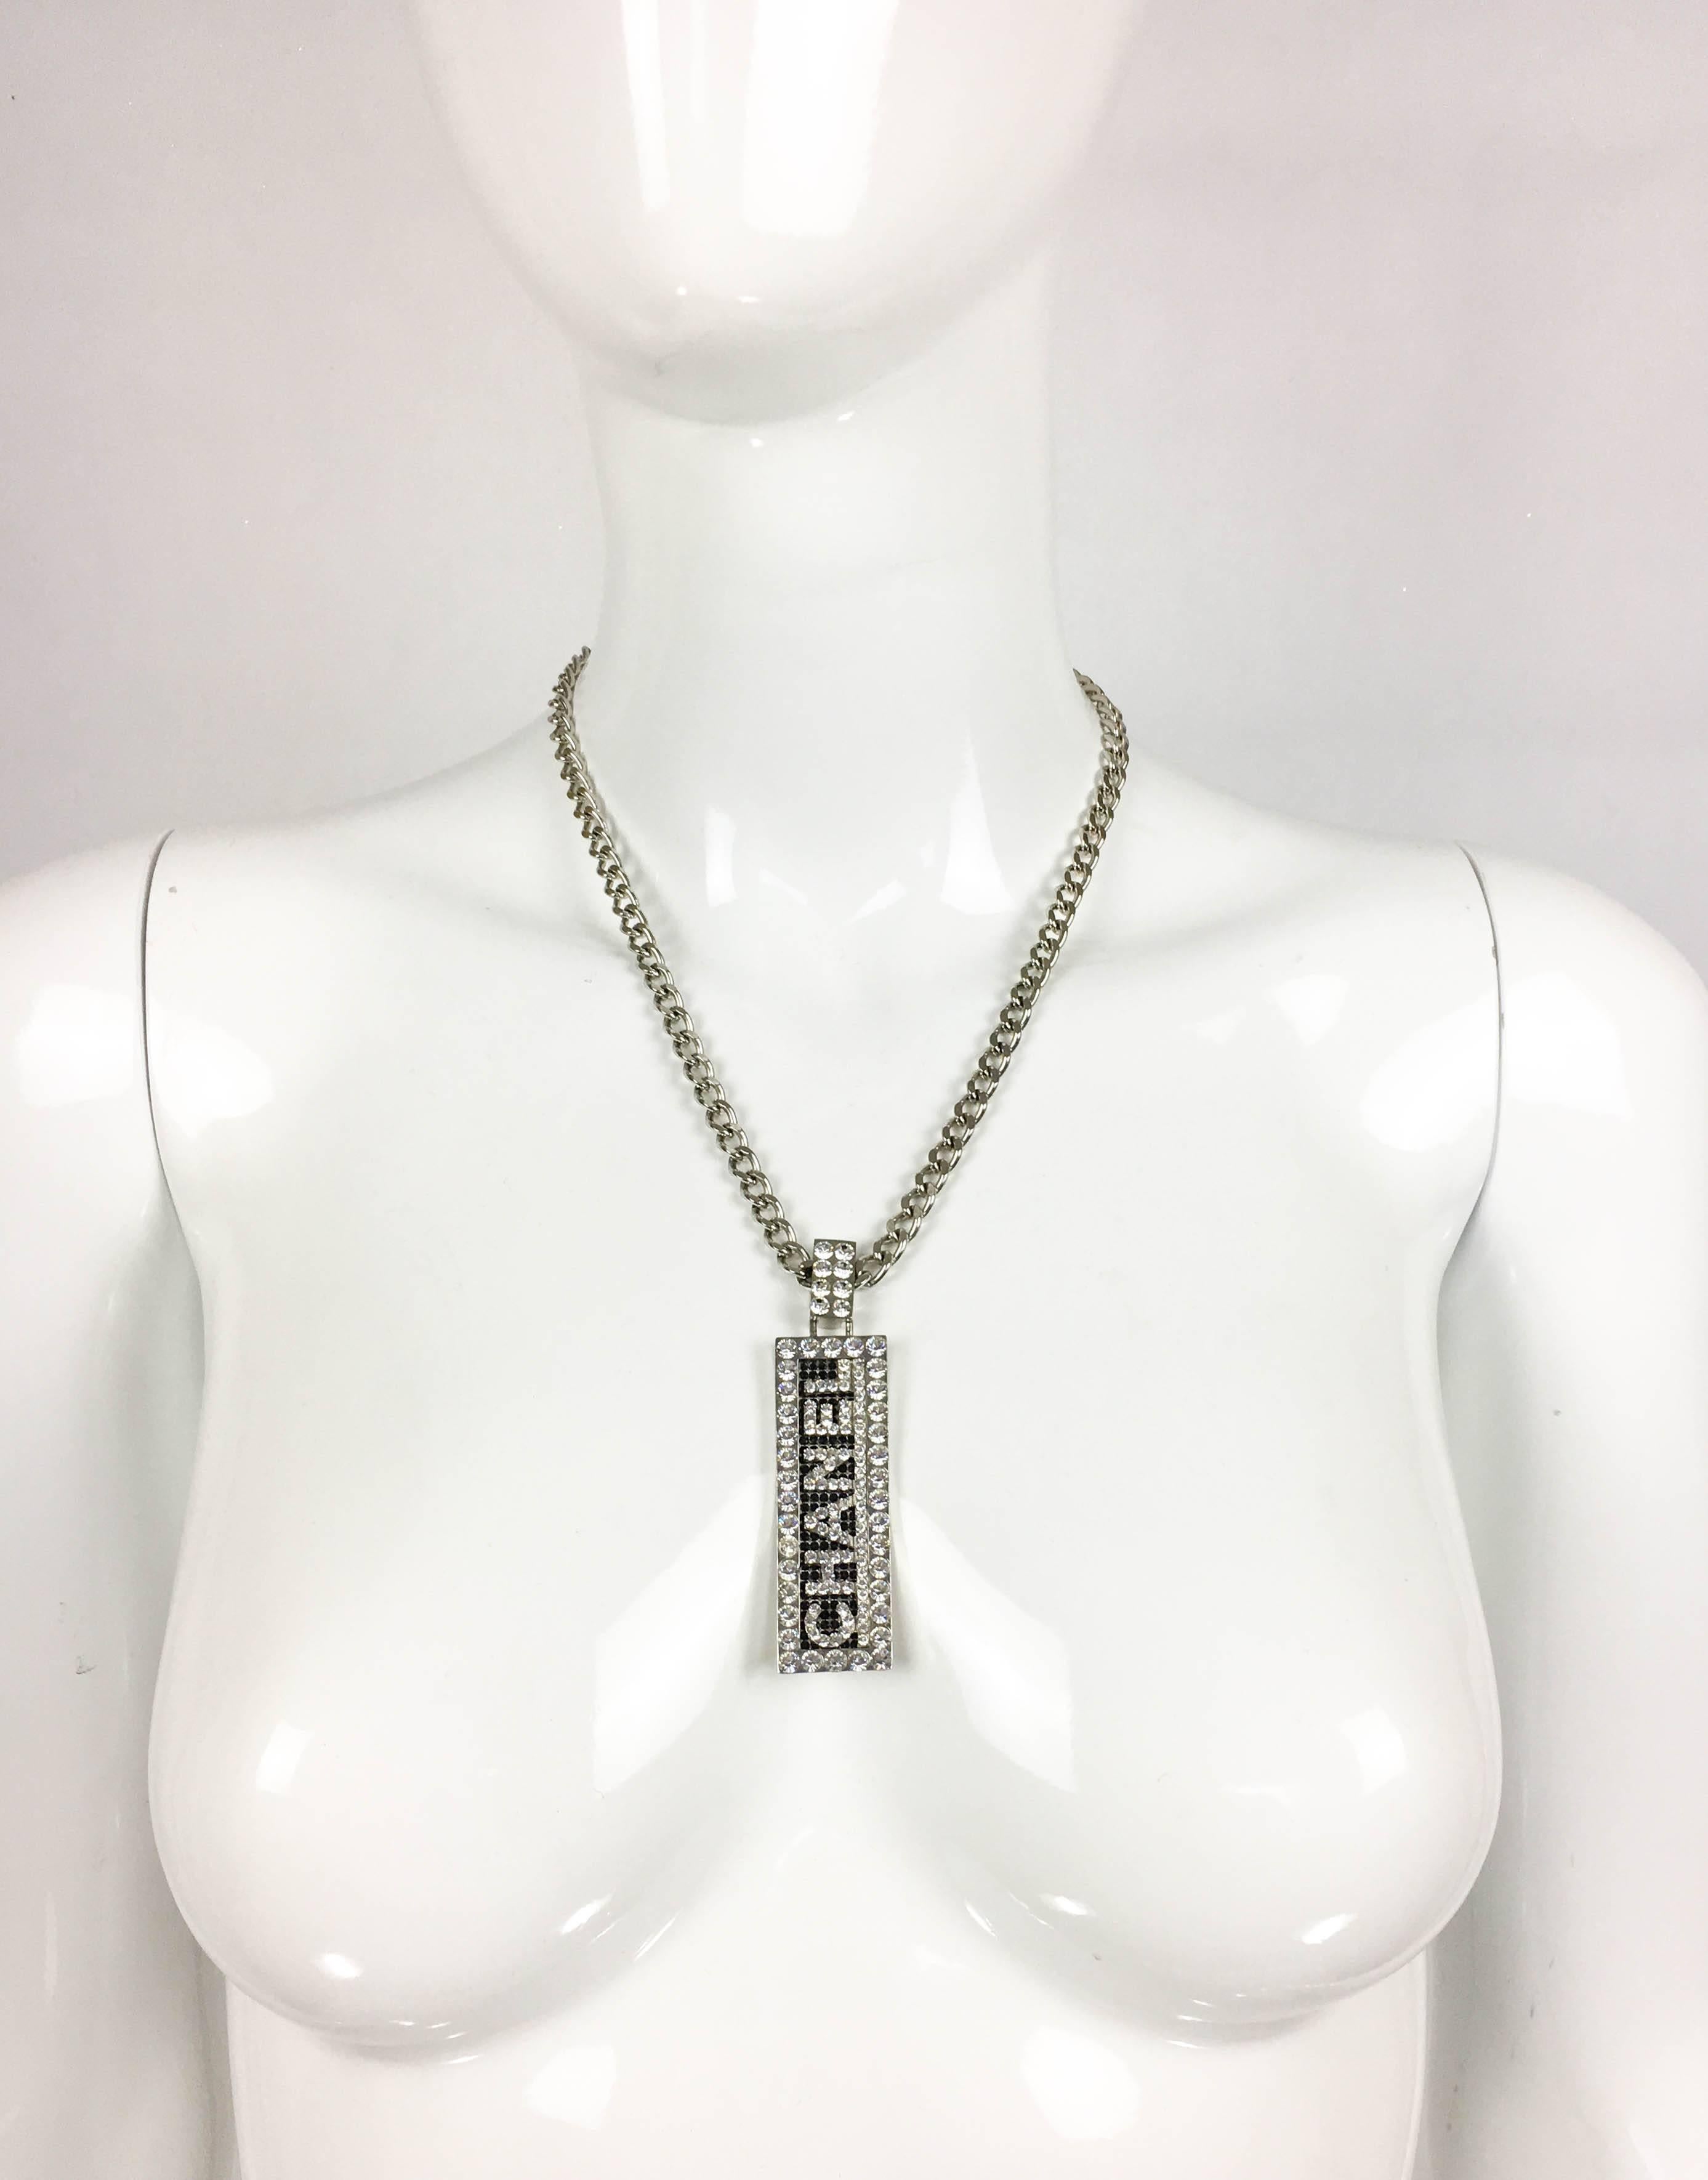 2003 Chanel Necklace With Rhinestone Chanel Plaque Pendant 3